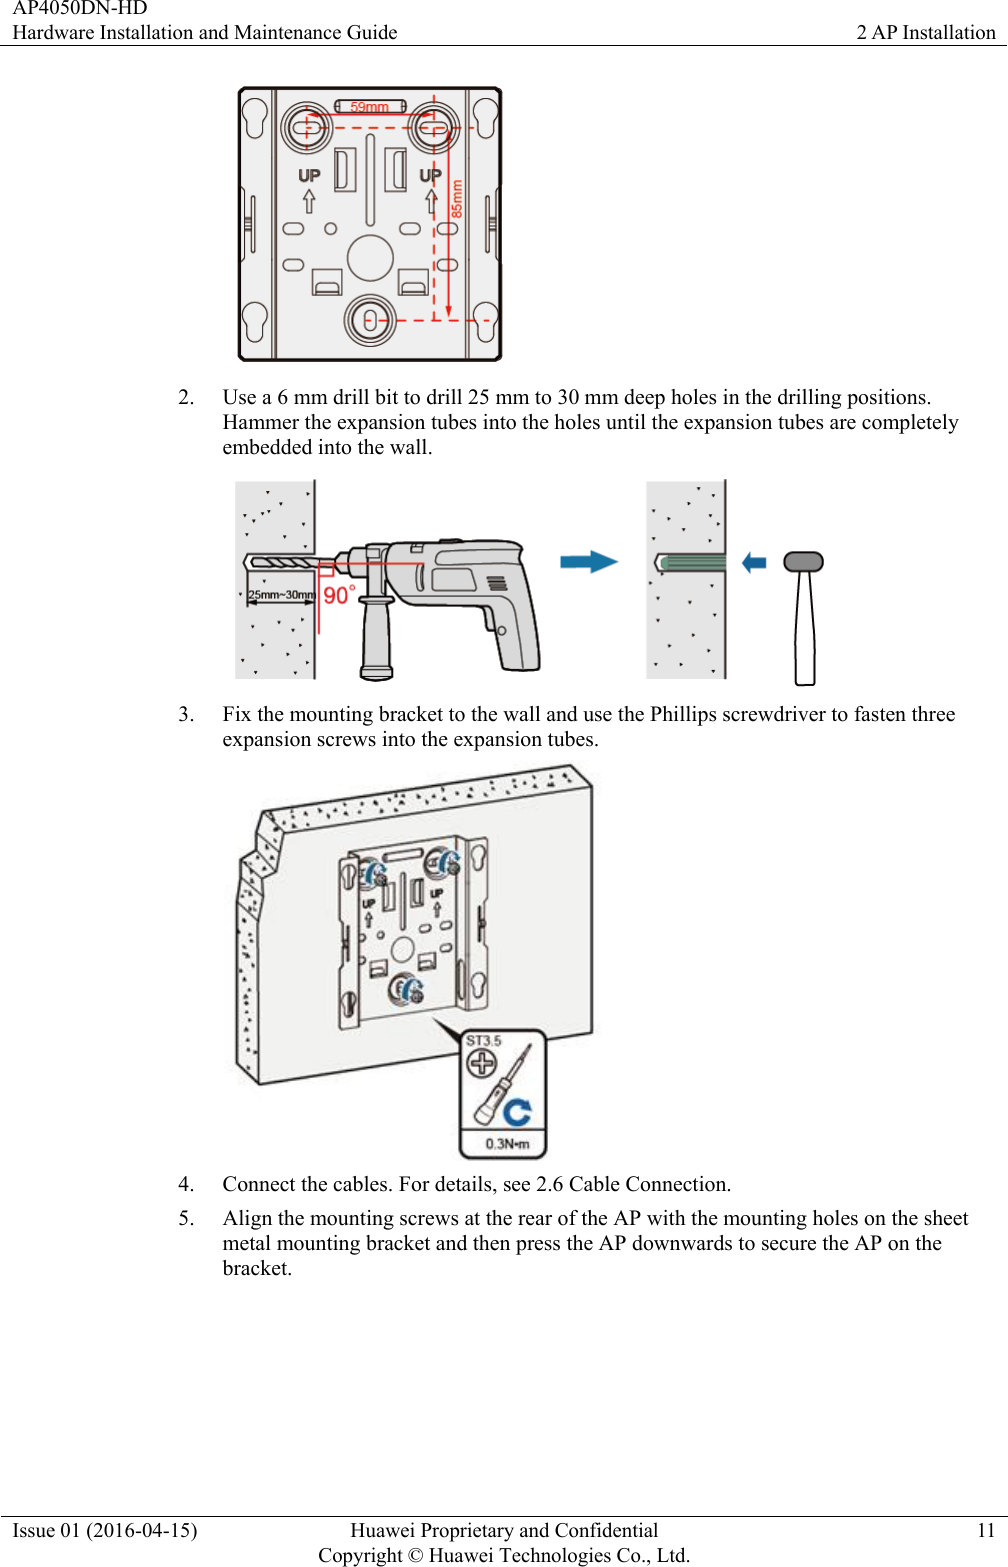 AP4050DN-HD Hardware Installation and Maintenance Guide  2 AP Installation Issue 01 (2016-04-15)  Huawei Proprietary and Confidential         Copyright © Huawei Technologies Co., Ltd.11  2. Use a 6 mm drill bit to drill 25 mm to 30 mm deep holes in the drilling positions. Hammer the expansion tubes into the holes until the expansion tubes are completely embedded into the wall.  3. Fix the mounting bracket to the wall and use the Phillips screwdriver to fasten three expansion screws into the expansion tubes.  4. Connect the cables. For details, see 2.6 Cable Connection. 5. Align the mounting screws at the rear of the AP with the mounting holes on the sheet metal mounting bracket and then press the AP downwards to secure the AP on the bracket. 